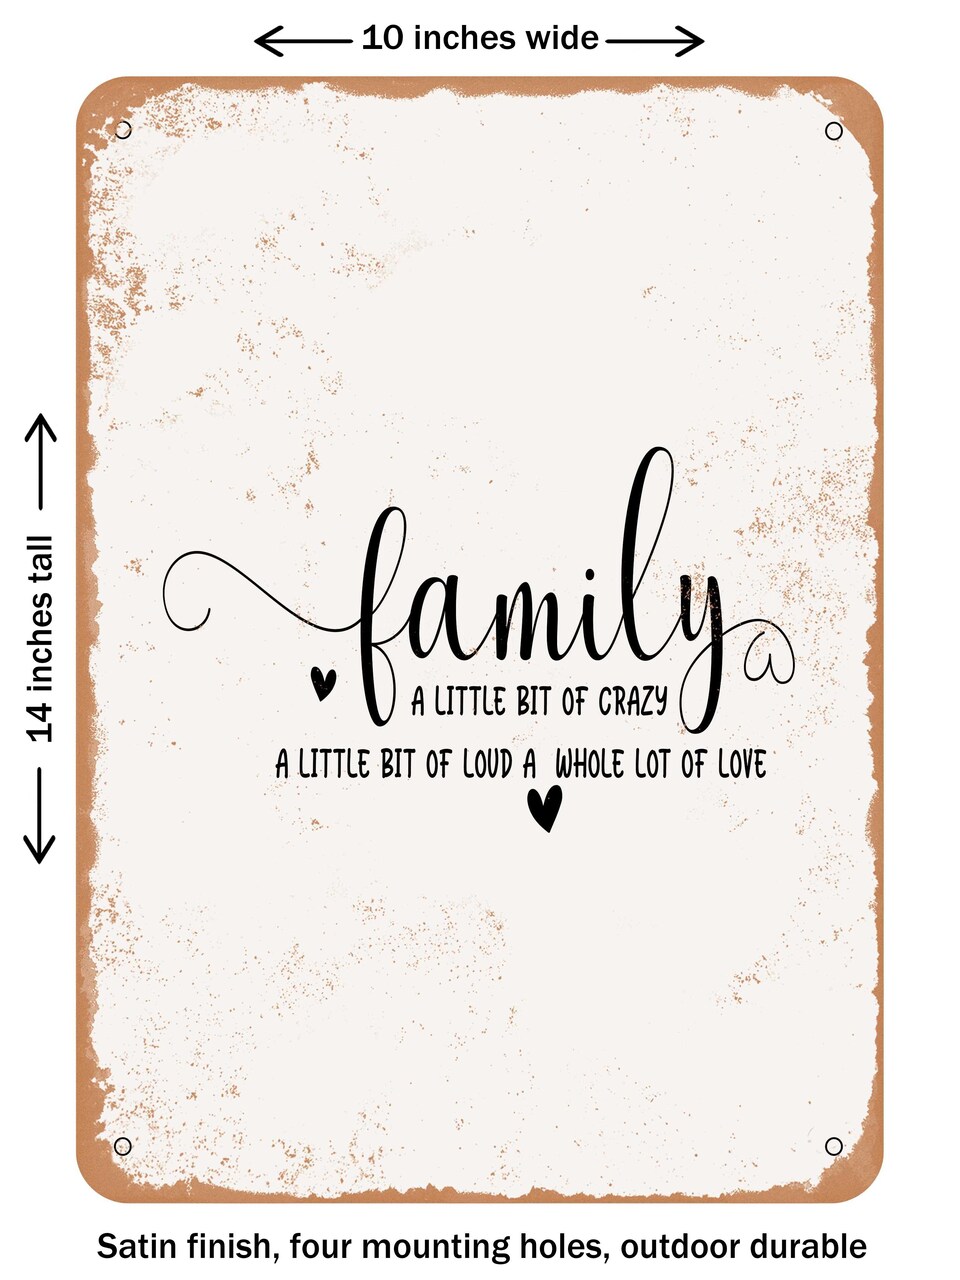 DECORATIVE METAL SIGN - Family a Little Bit of Crazy a Little Bit of Loud a Whole Lot of Love  - Vintage Rusty Look